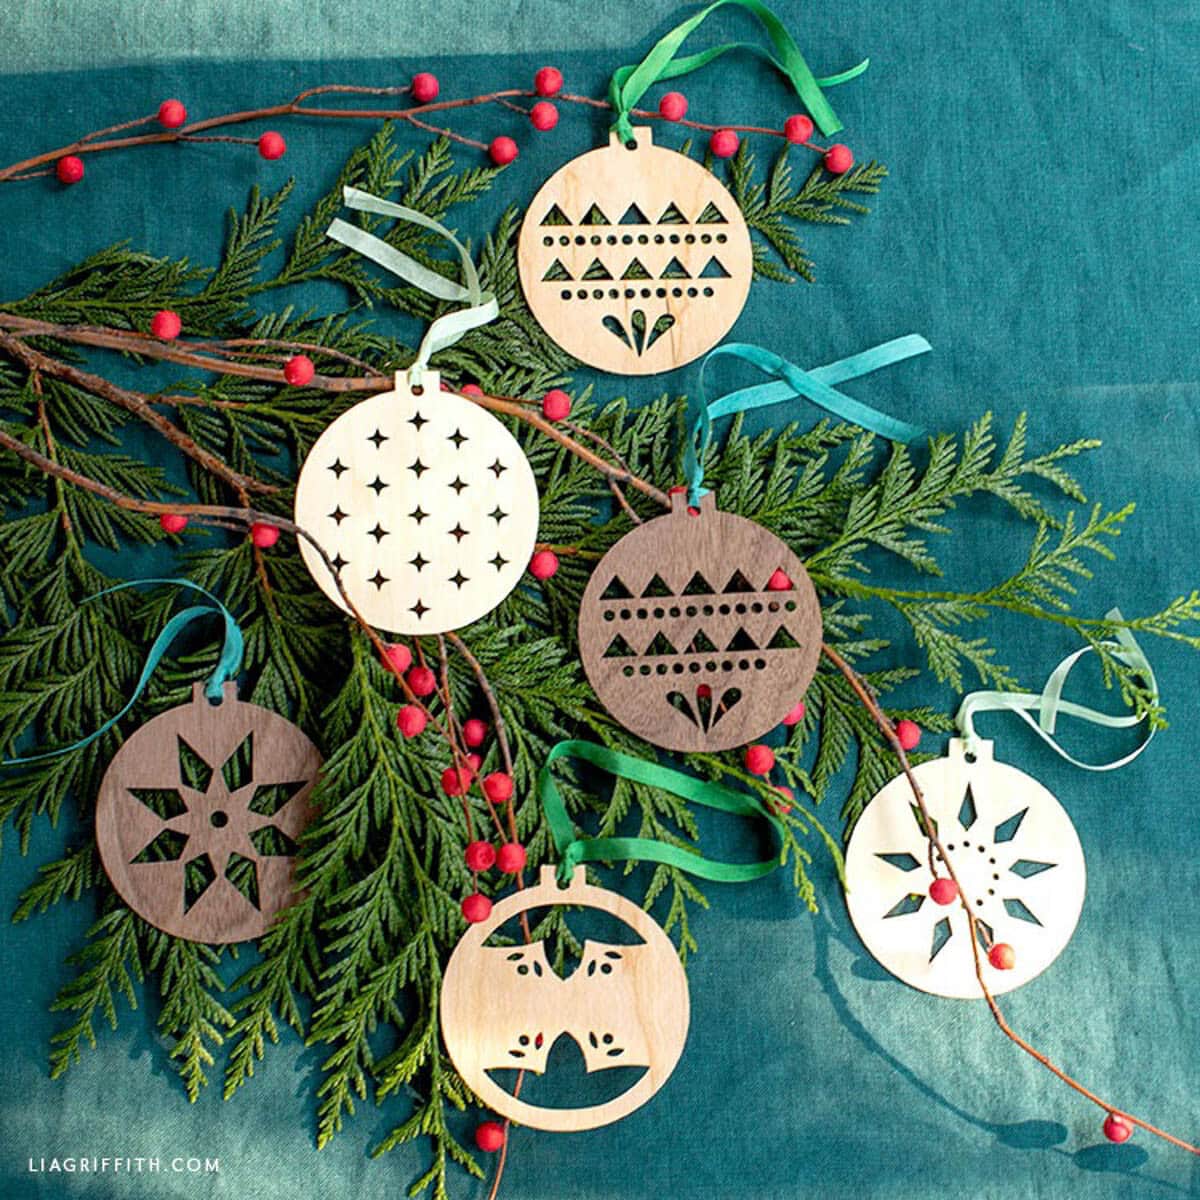 Assortment of six wood ornaments made with Cricut in a Scandinavian style